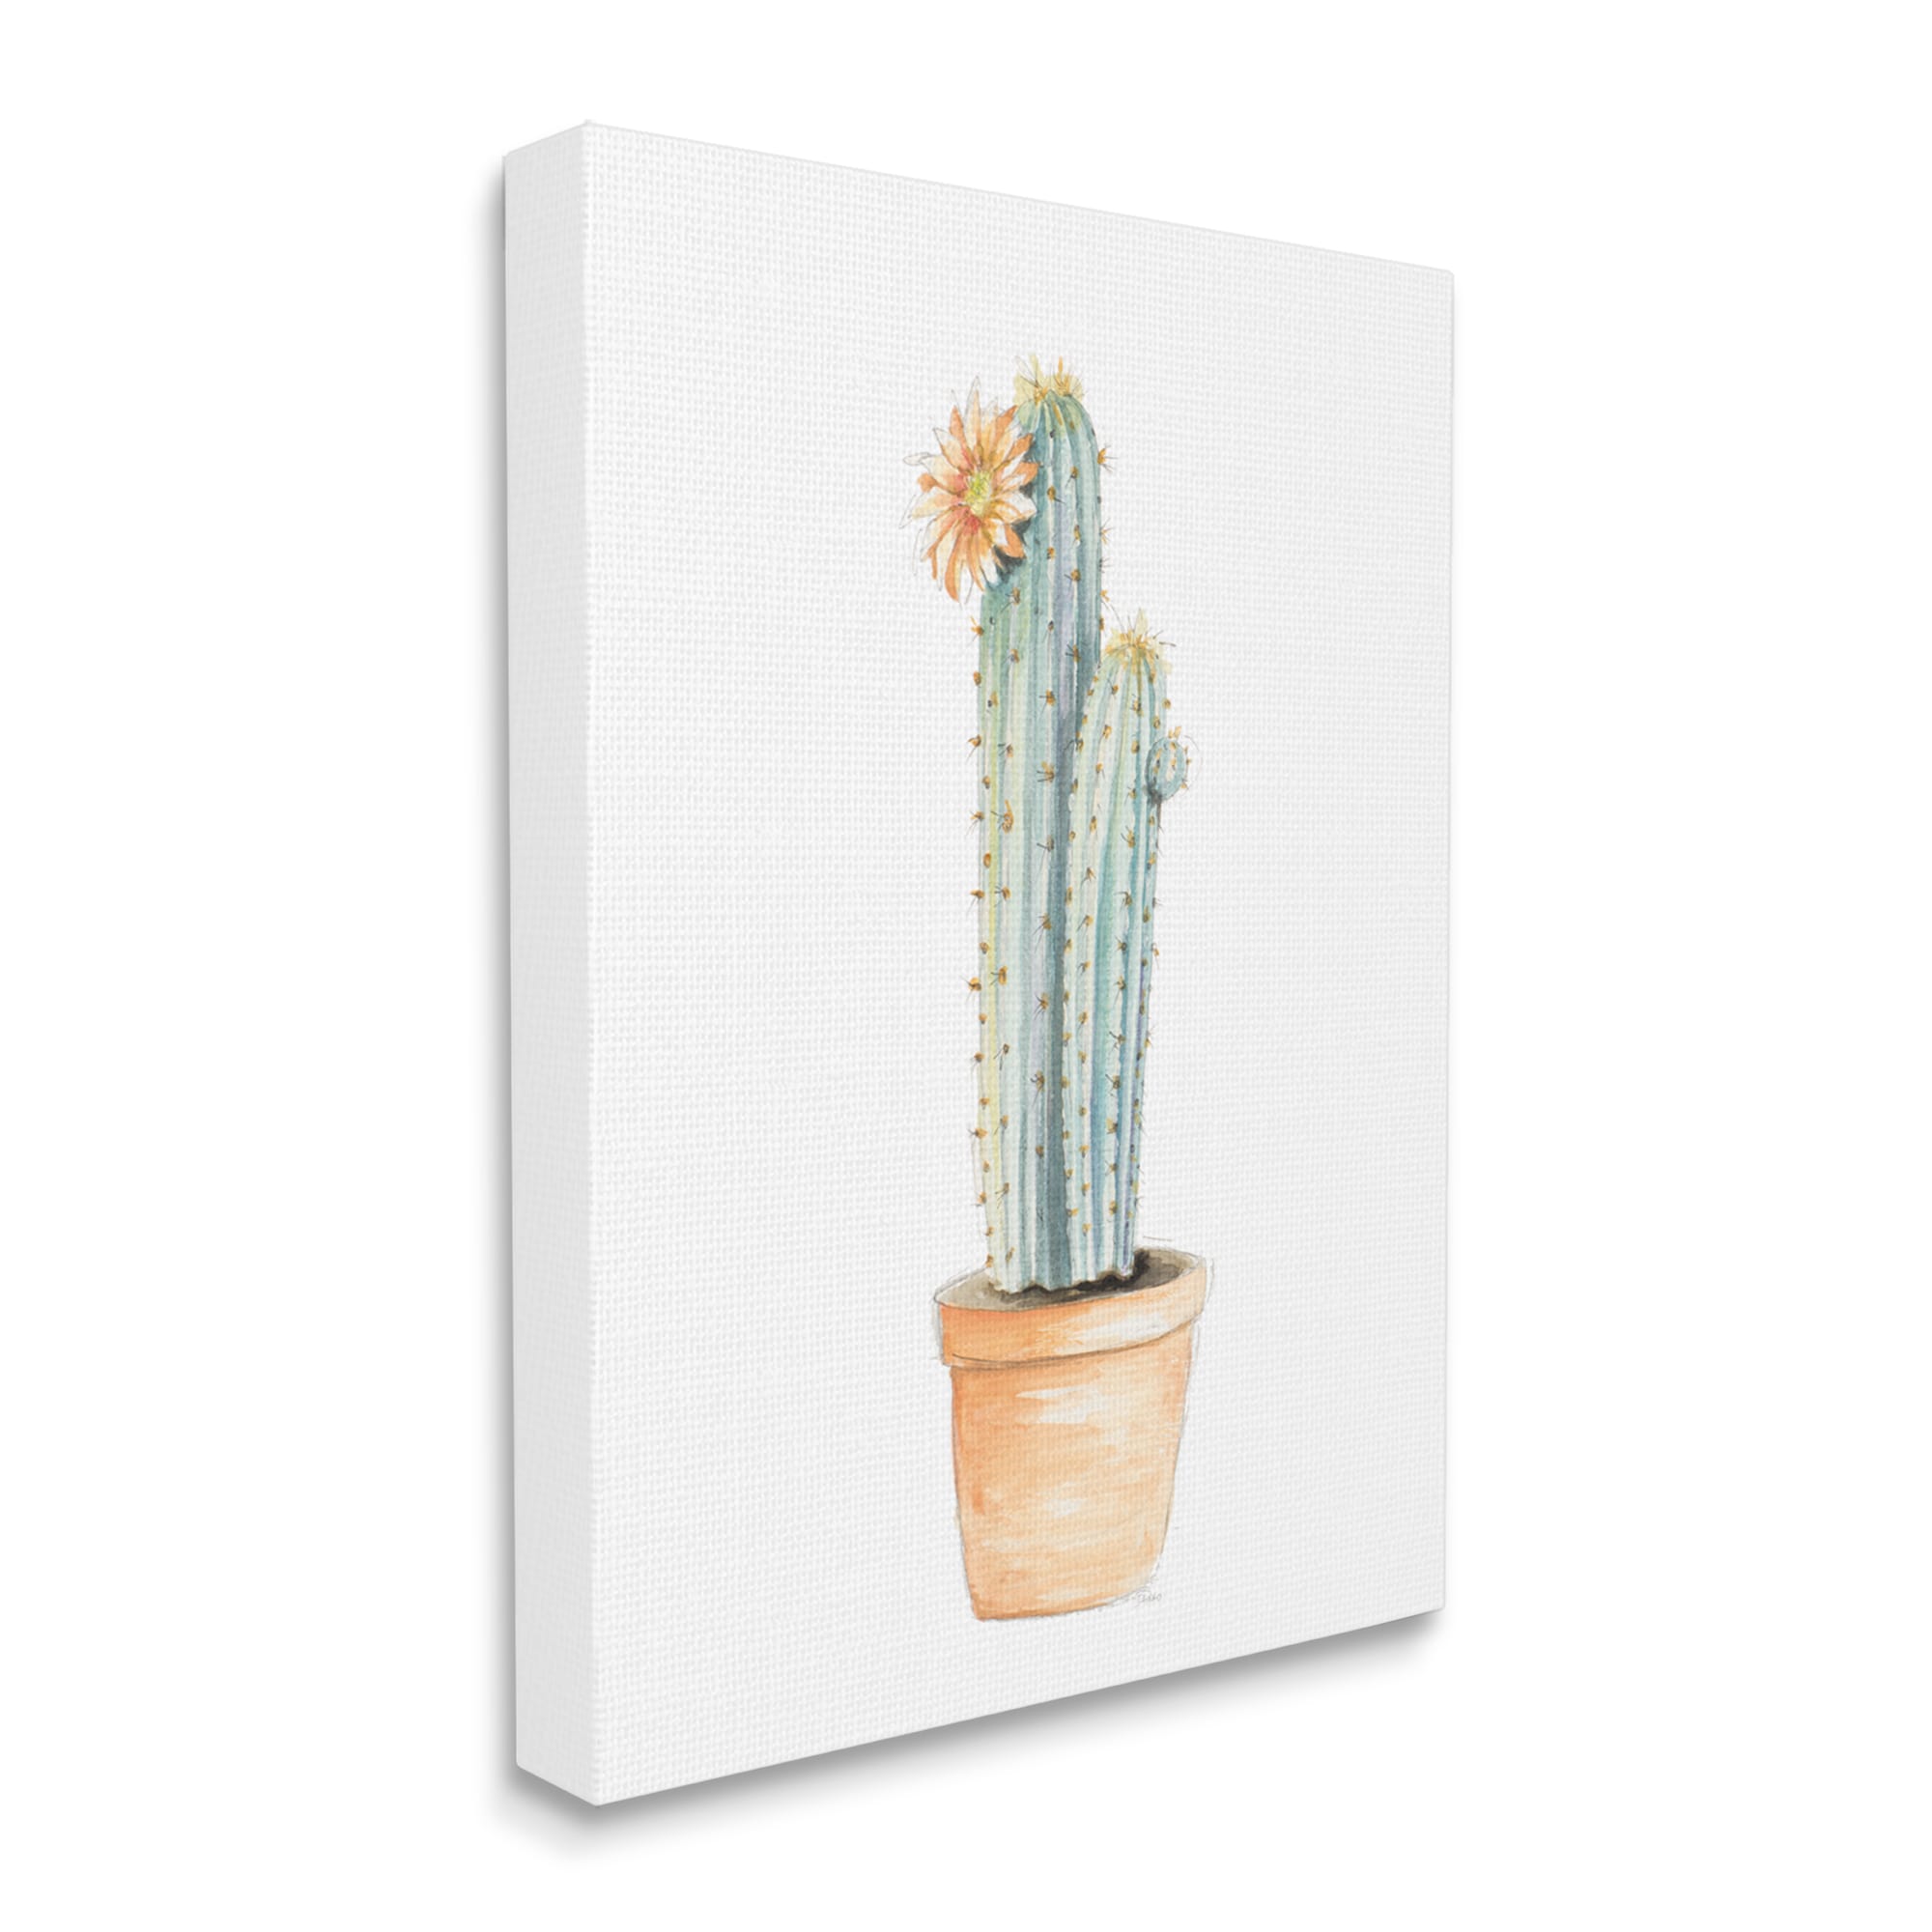 Stupell Industries Flowering Cactus Minimal Tones Patricia Pinto H x 24-in W Floral Print on Canvas in the Wall Art department at Lowes.com